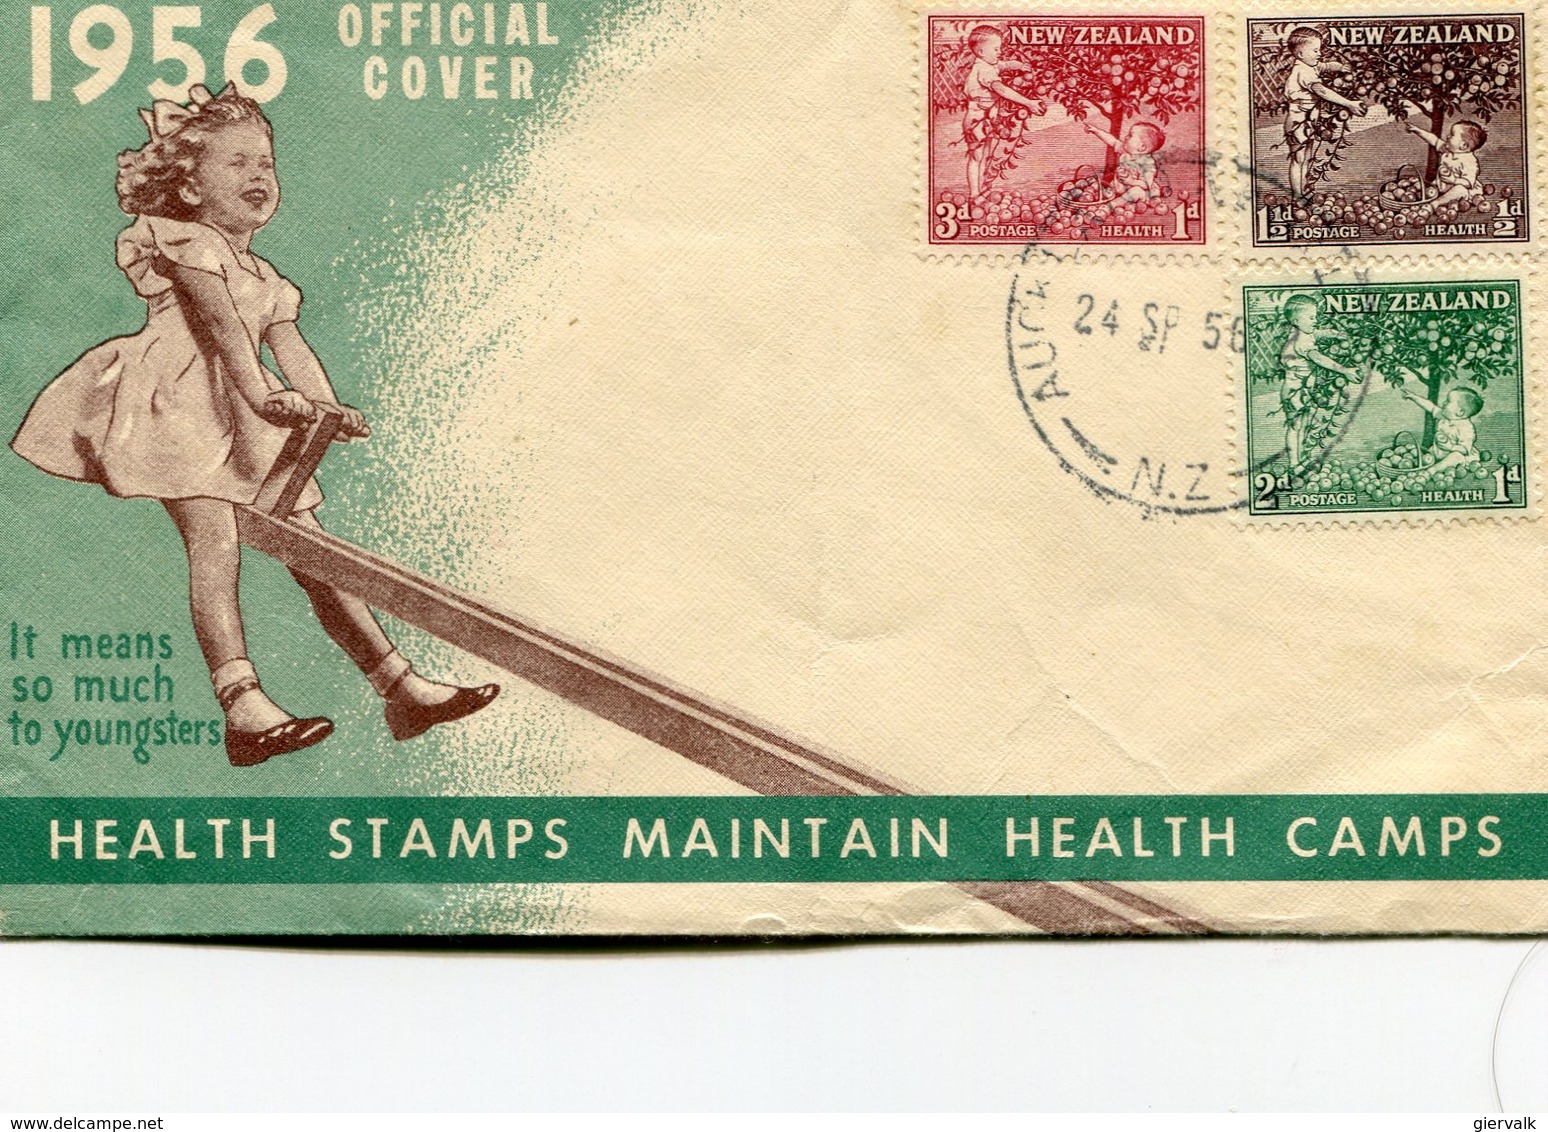 NEW ZEALAND 1956 FDC Health Stamps.BARGAIN.!! - FDC